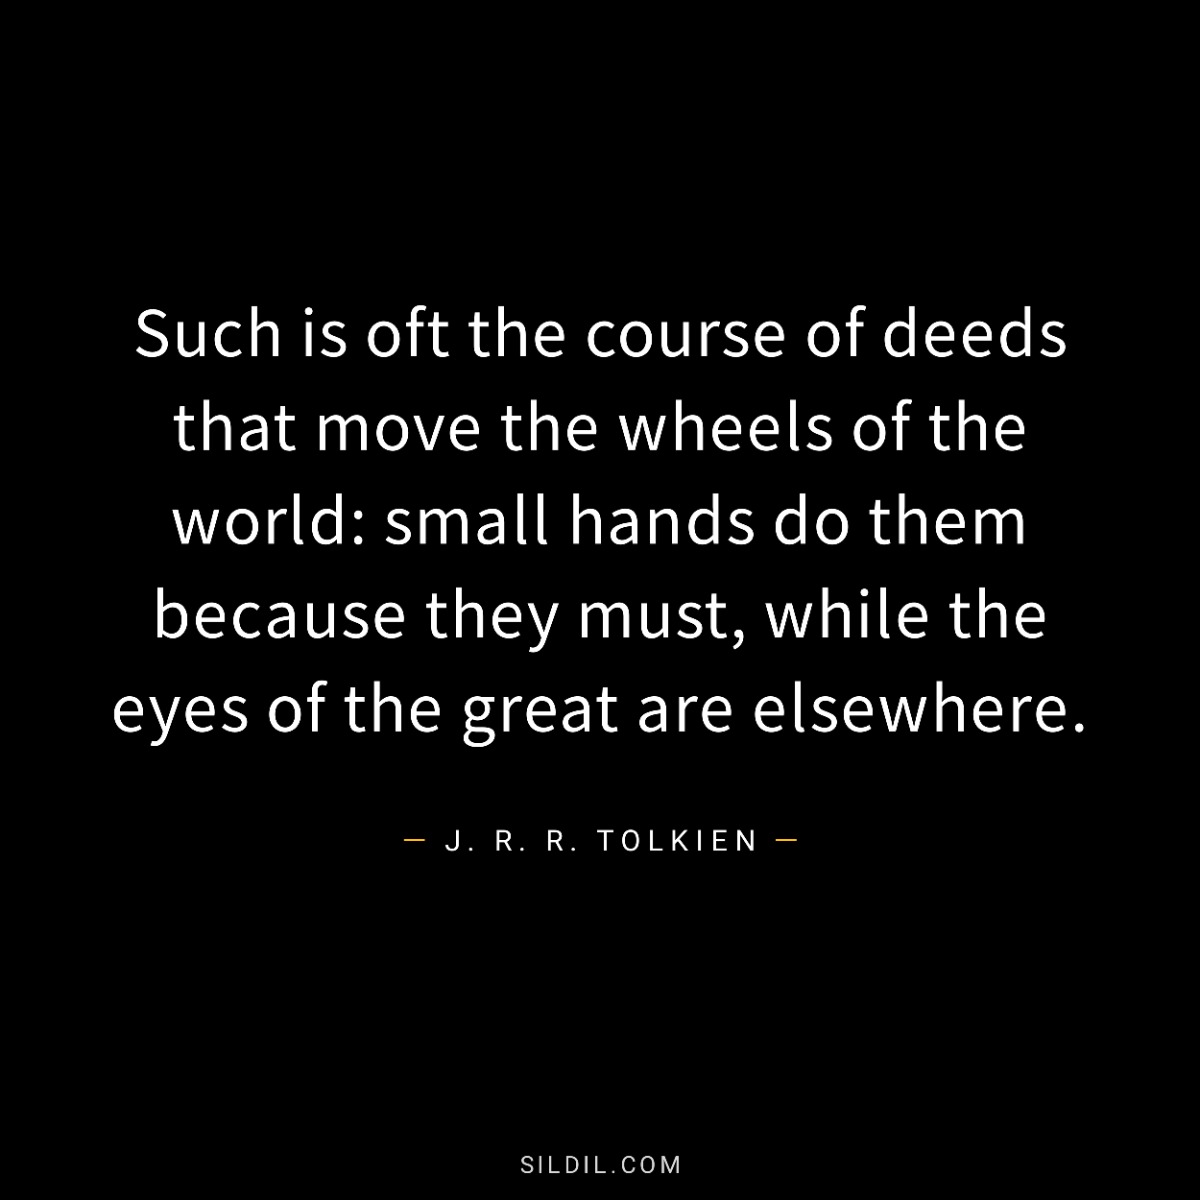 Such is oft the course of deeds that move the wheels of the world: small hands do them because they must, while the eyes of the great are elsewhere.